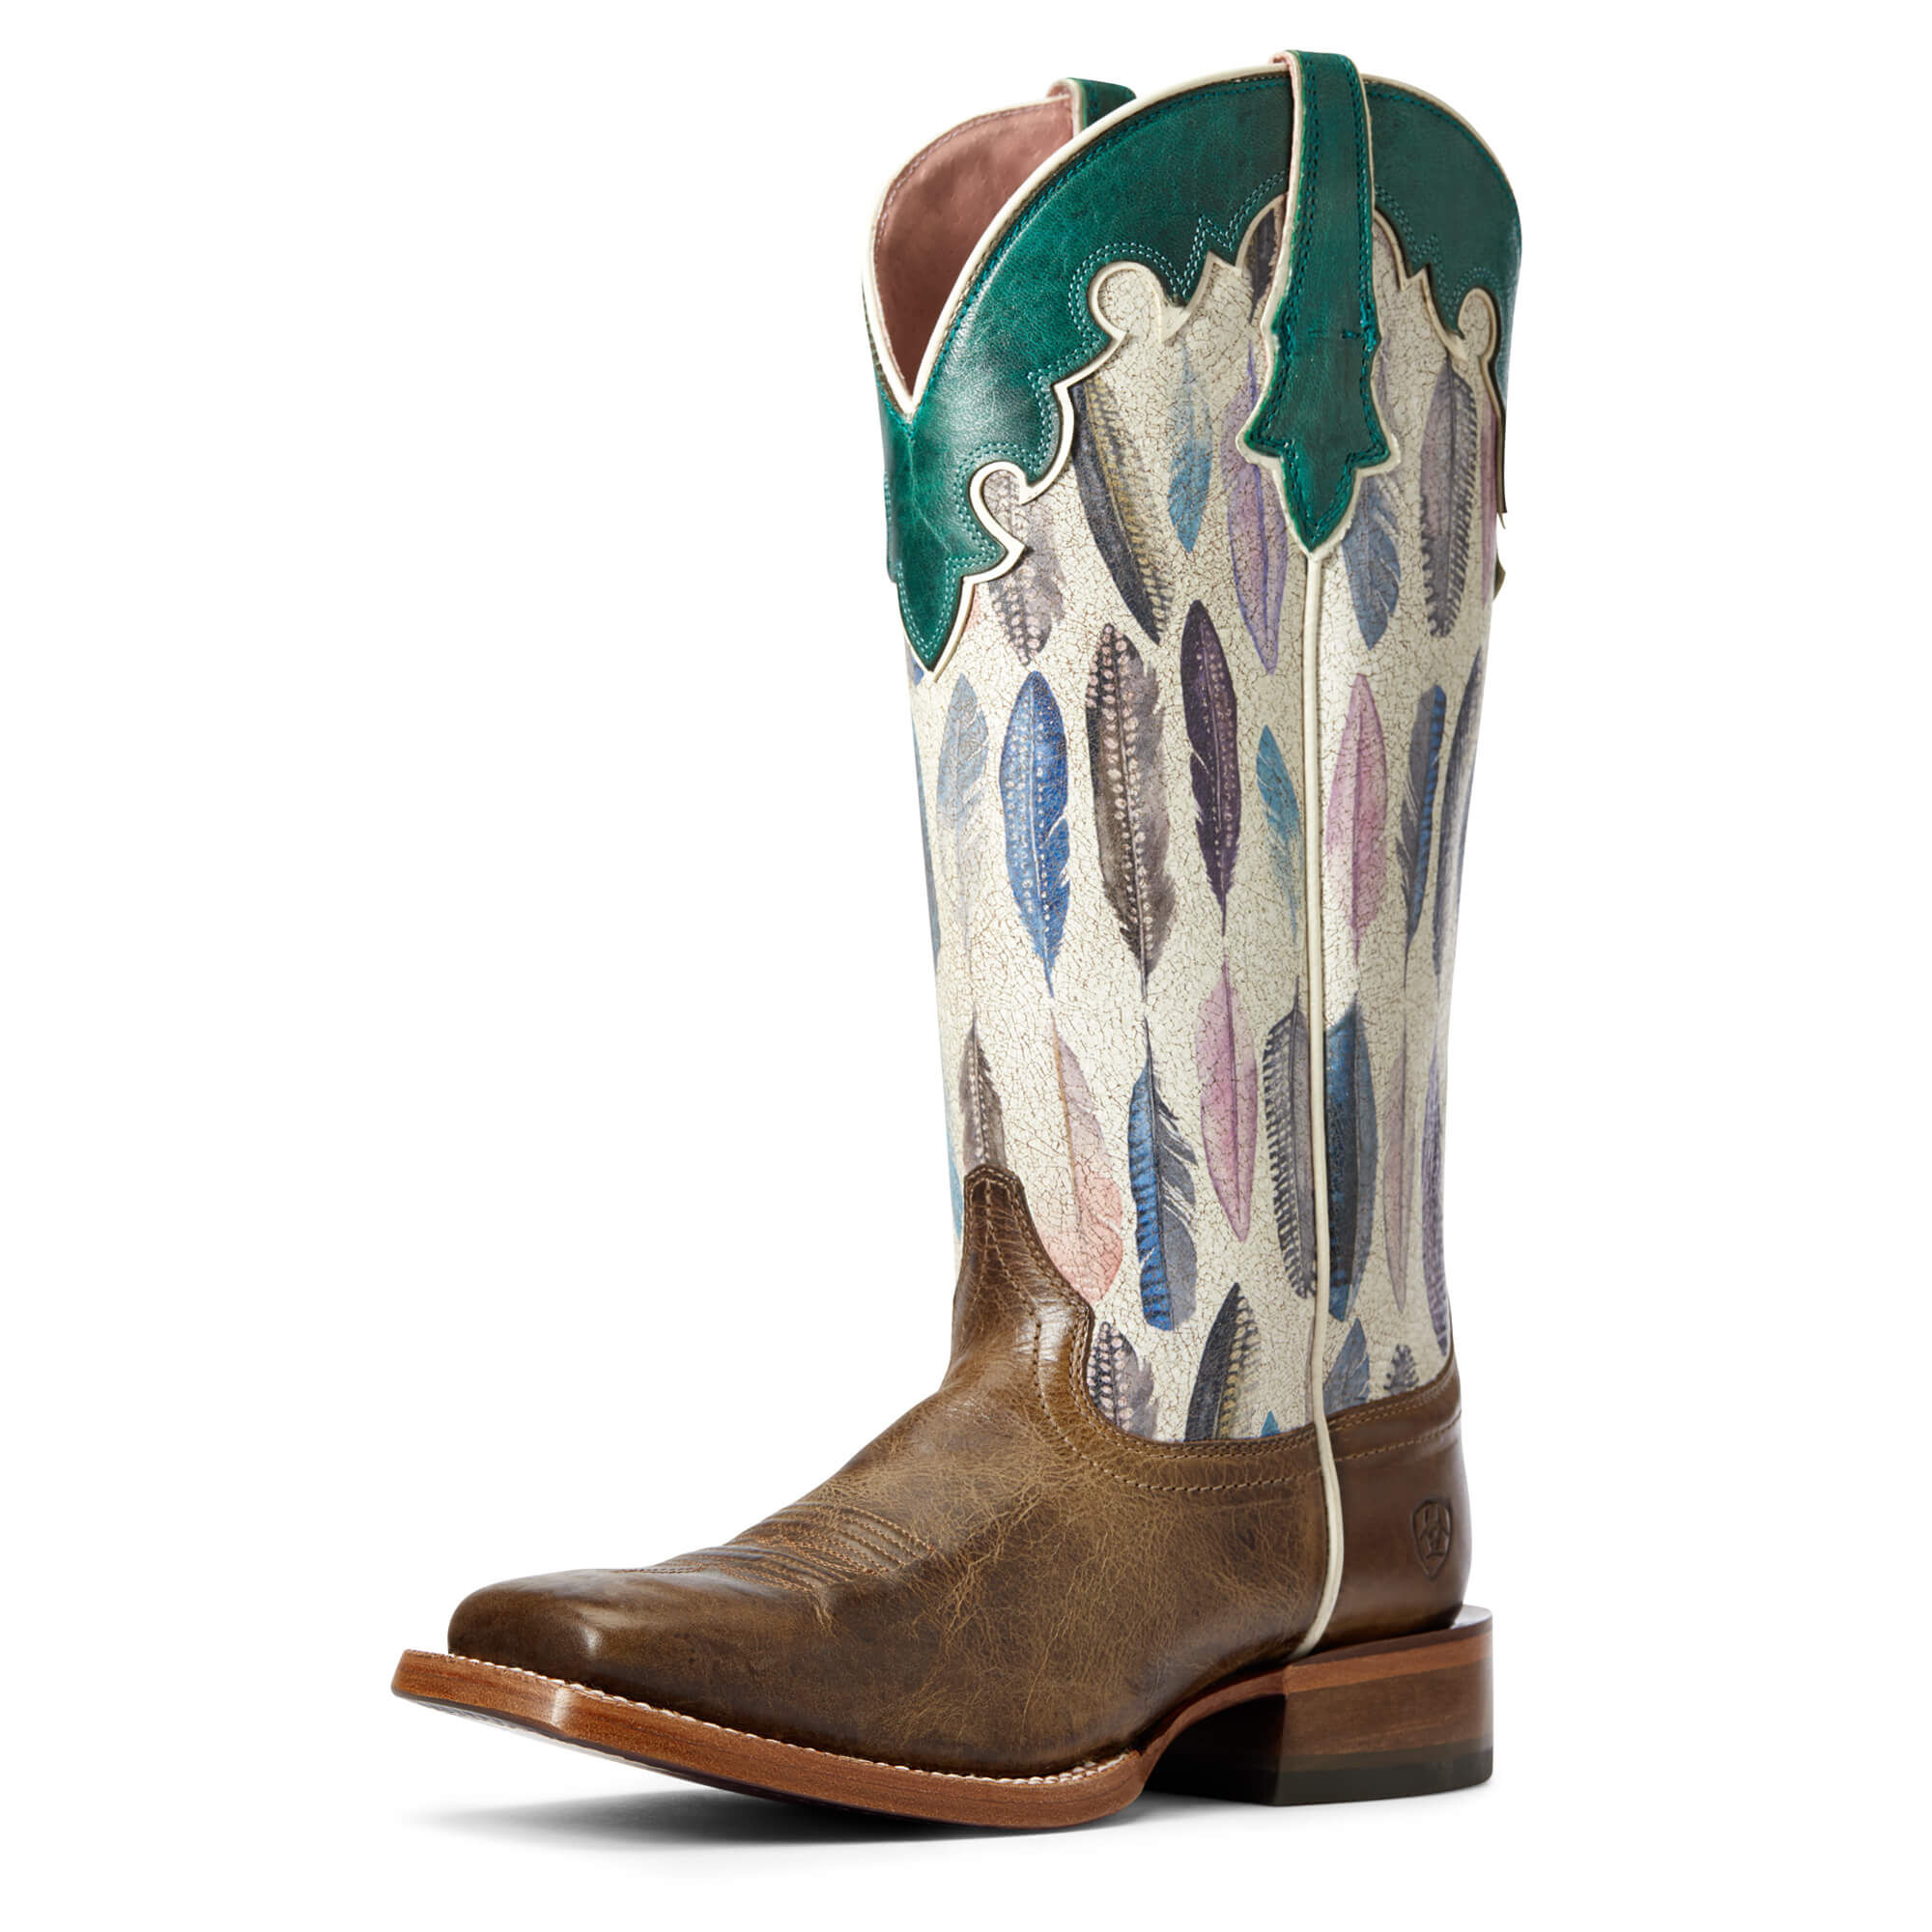 Women's Fonda Western Boots in Tucson Taupe Leather  by Ariat